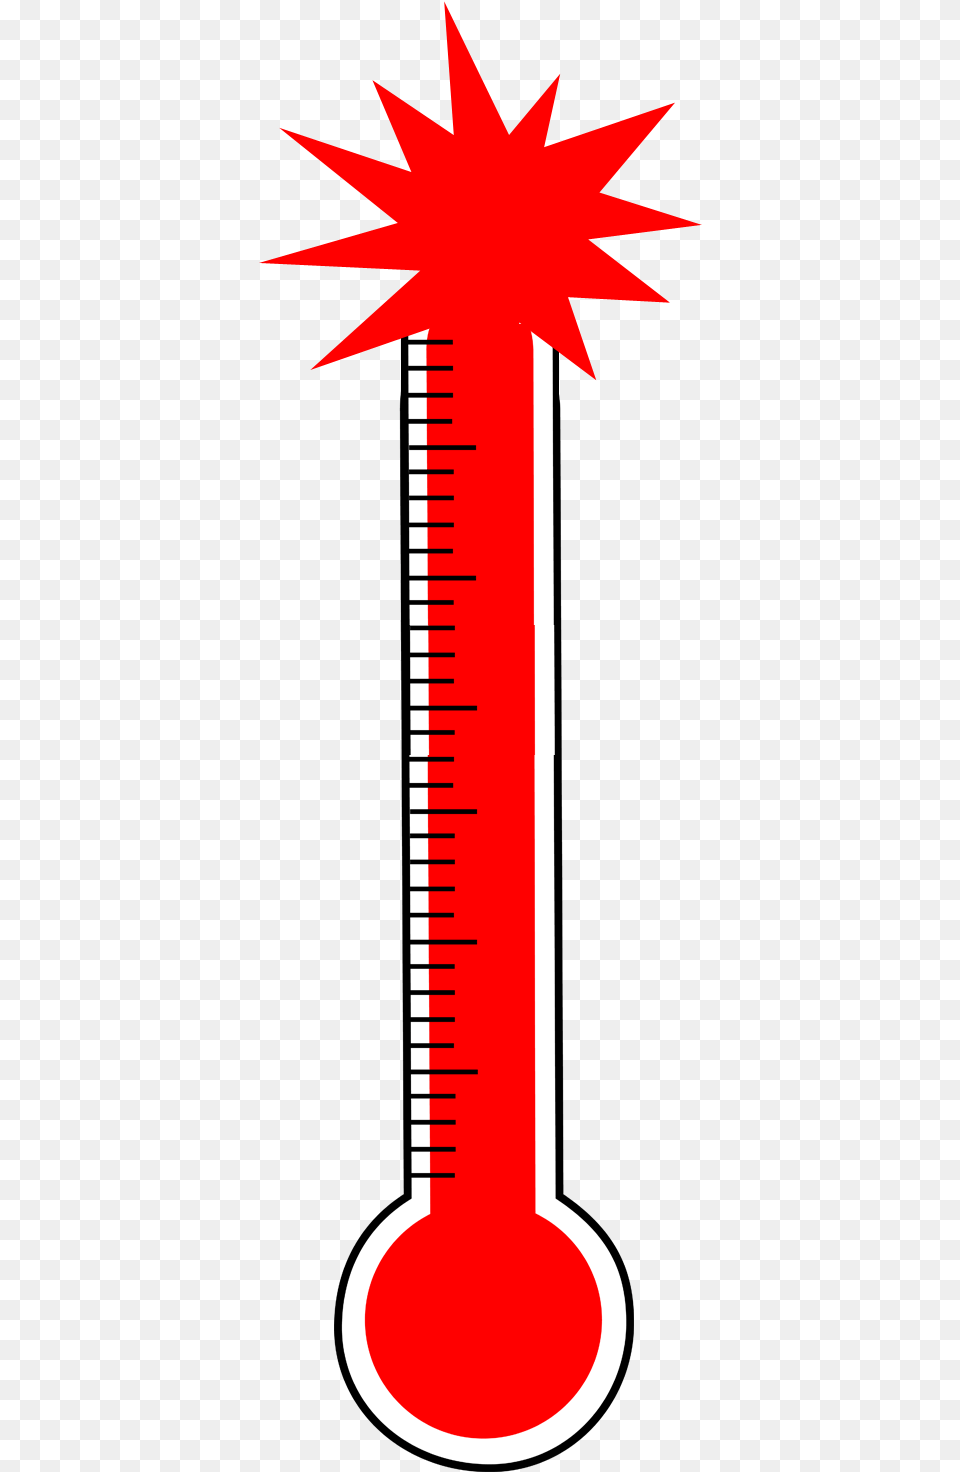 Beat The Heat Tips For Cancer Patients Cartoon Thermometer, Dynamite, Weapon Png Image